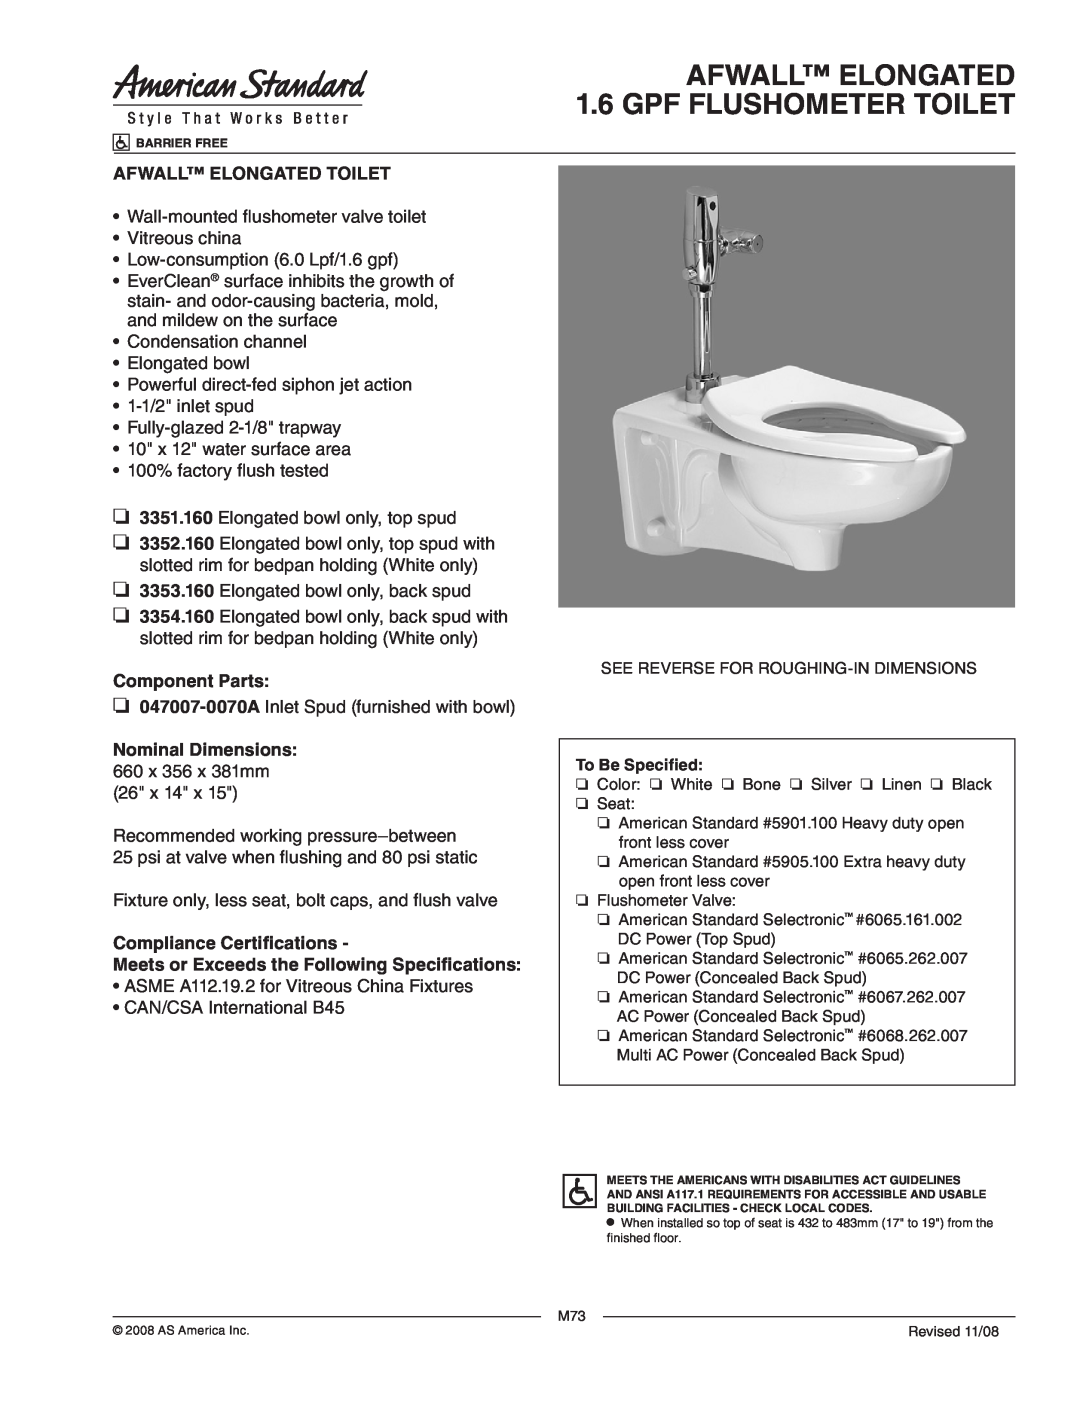 American Standard 3354.160, 3351.160 dimensions AFWALL ELONGATED 1.6 GPF FLUSHOMETER TOILET, Afwall Elongated Toilet 